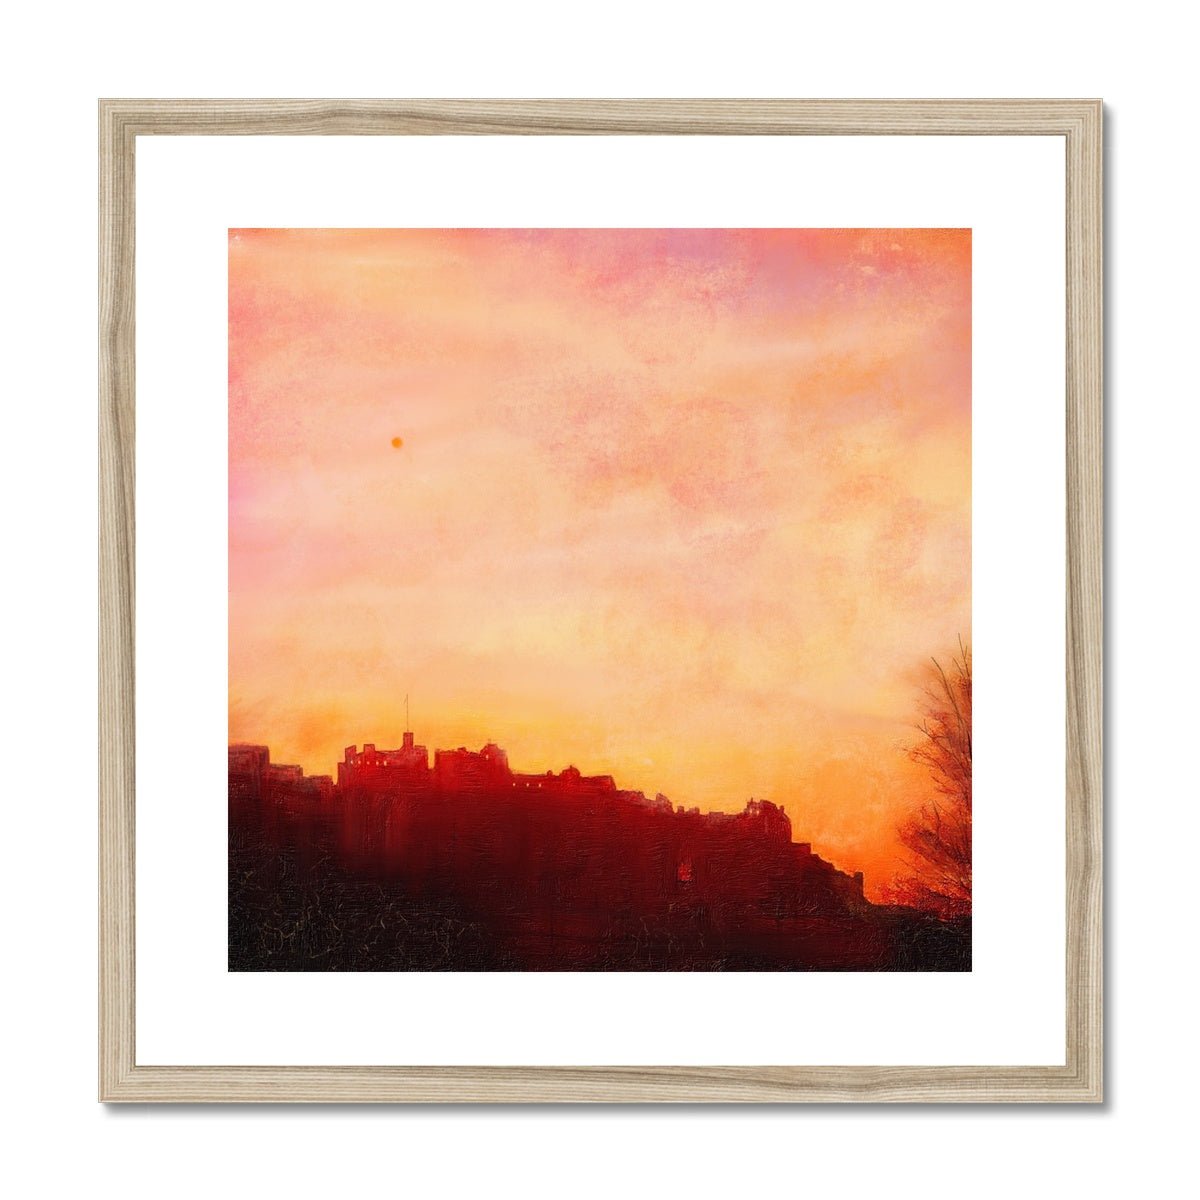 Edinburgh Castle Sunset Painting | Framed & Mounted Prints From Scotland-Framed & Mounted Prints-Historic & Iconic Scotland Art Gallery-20"x20"-Natural Frame-Paintings, Prints, Homeware, Art Gifts From Scotland By Scottish Artist Kevin Hunter